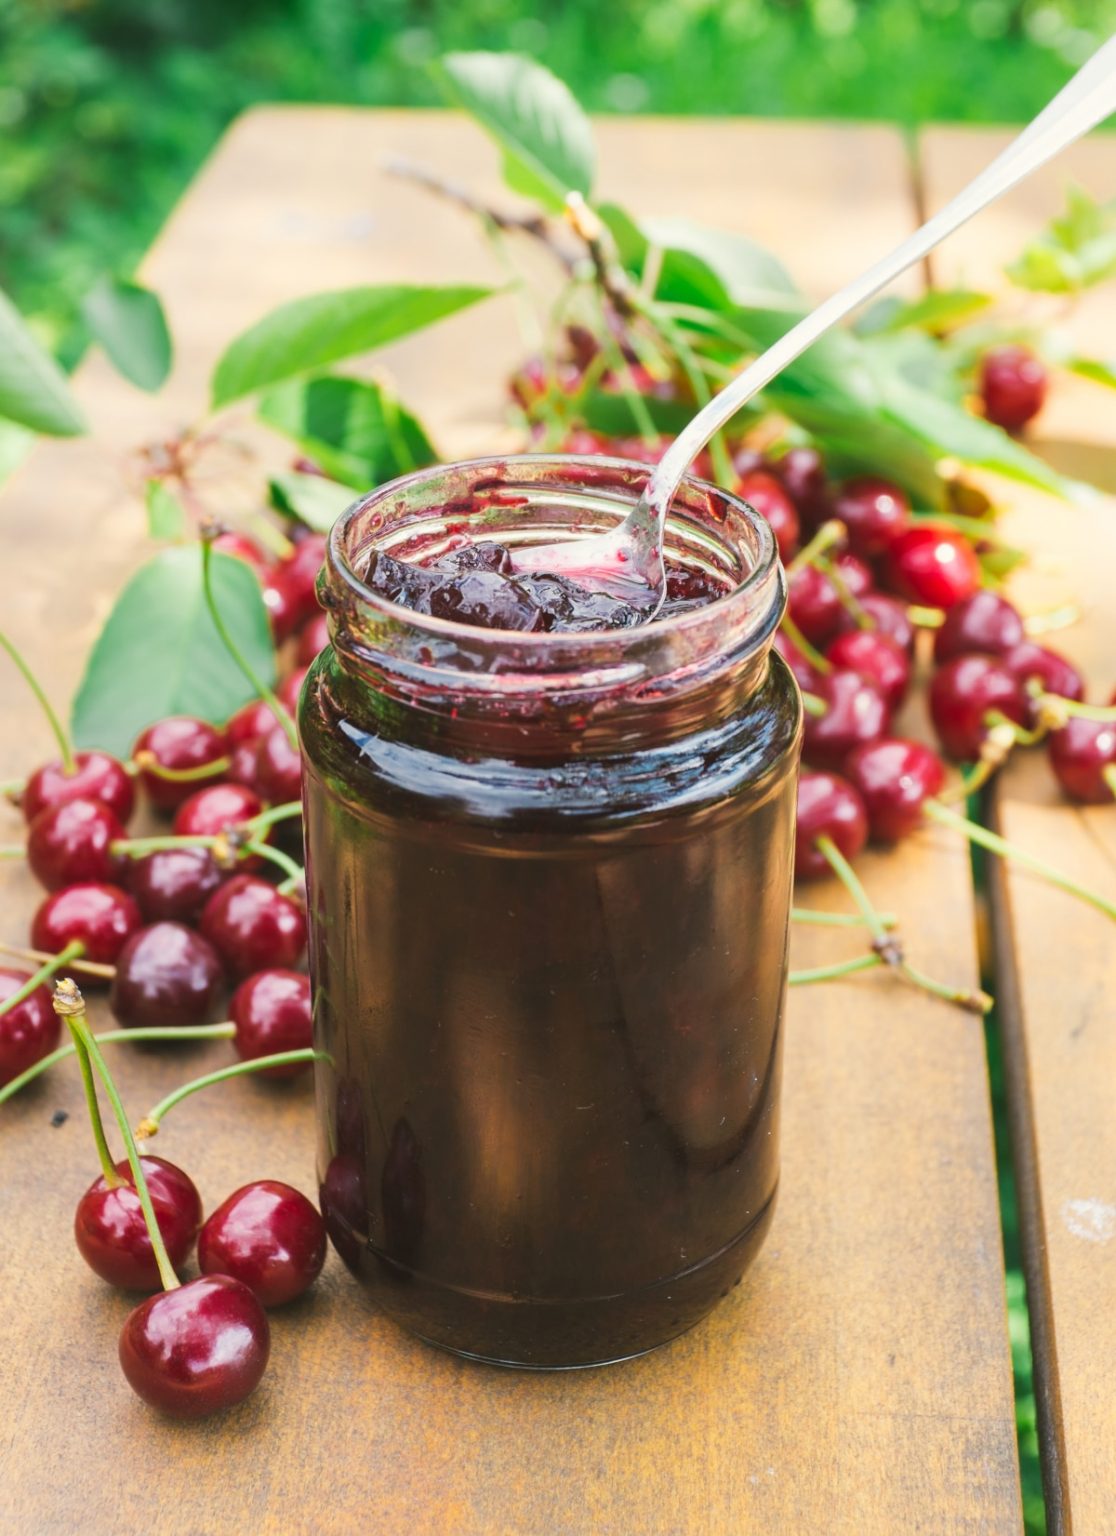 Sour Cherries: Two Classic Preserves